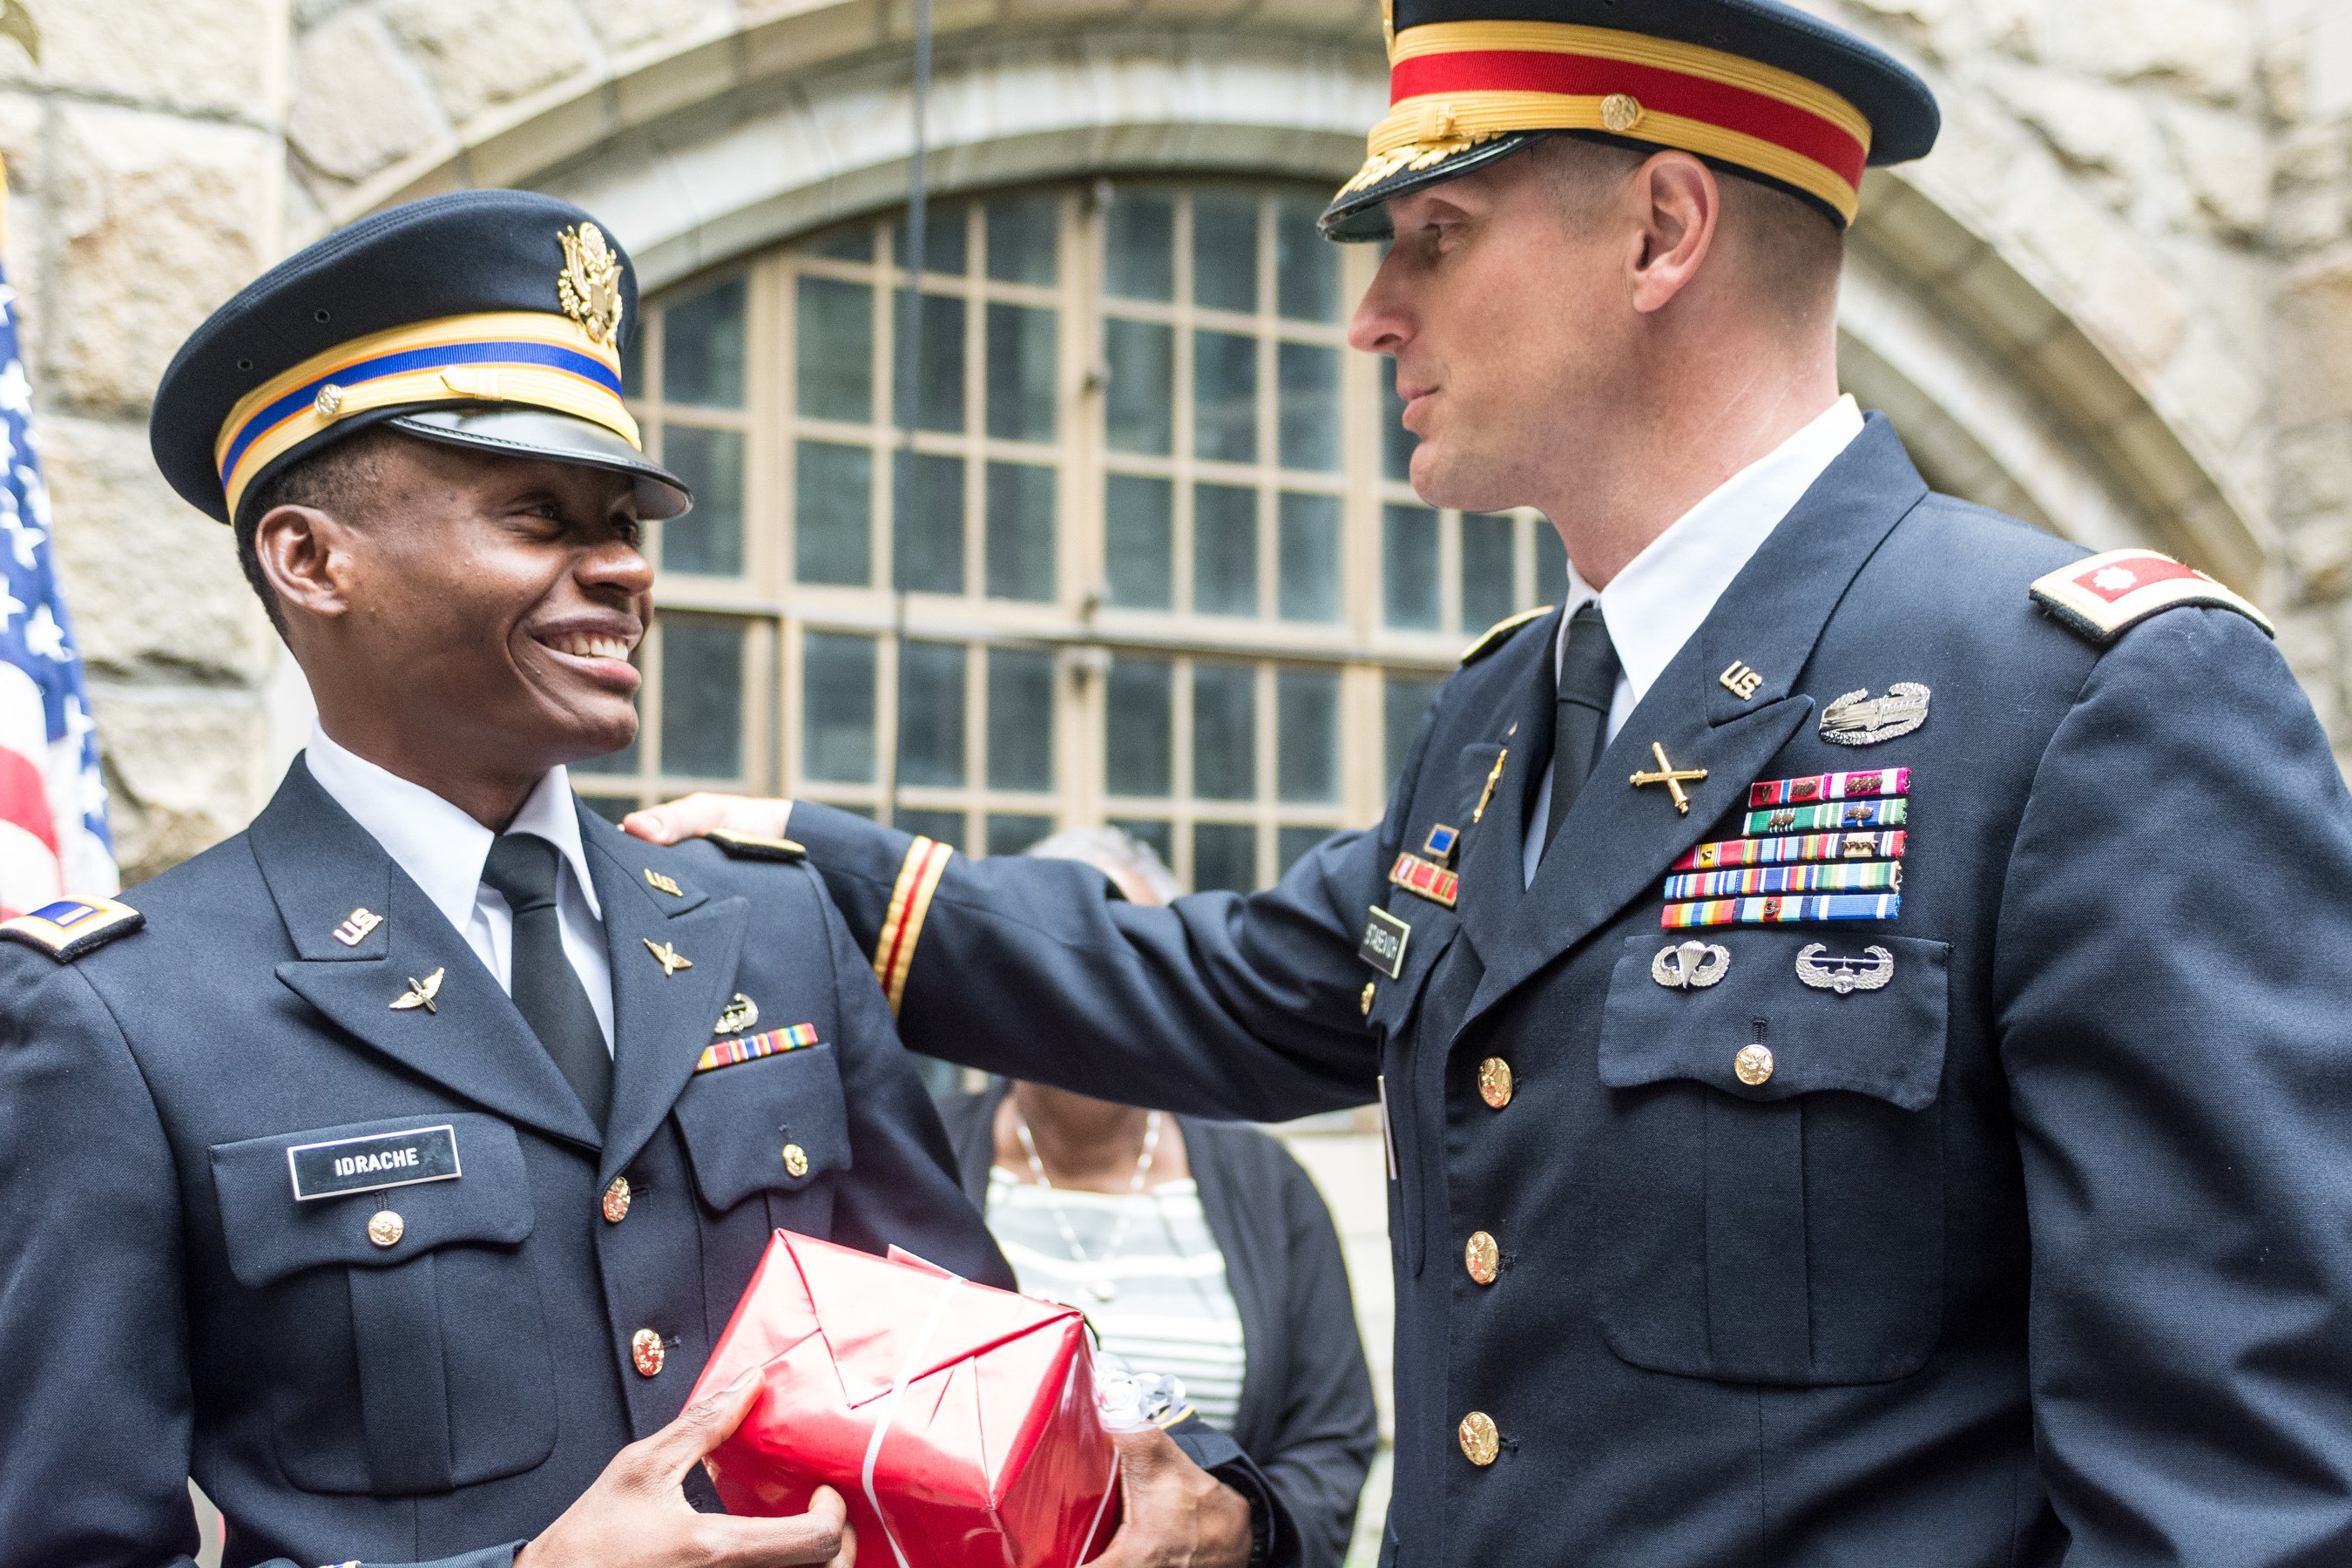 Newly commissioned 2nd Lt. Alix Schoelcher Idrache, became the Maryland Army National Guard's first US Military Academy graduate on May 21. Idrache, originally from Haiti, graduated at the top of his class in physics and will attend Army aviation school at Fort Rucker, Alabama.